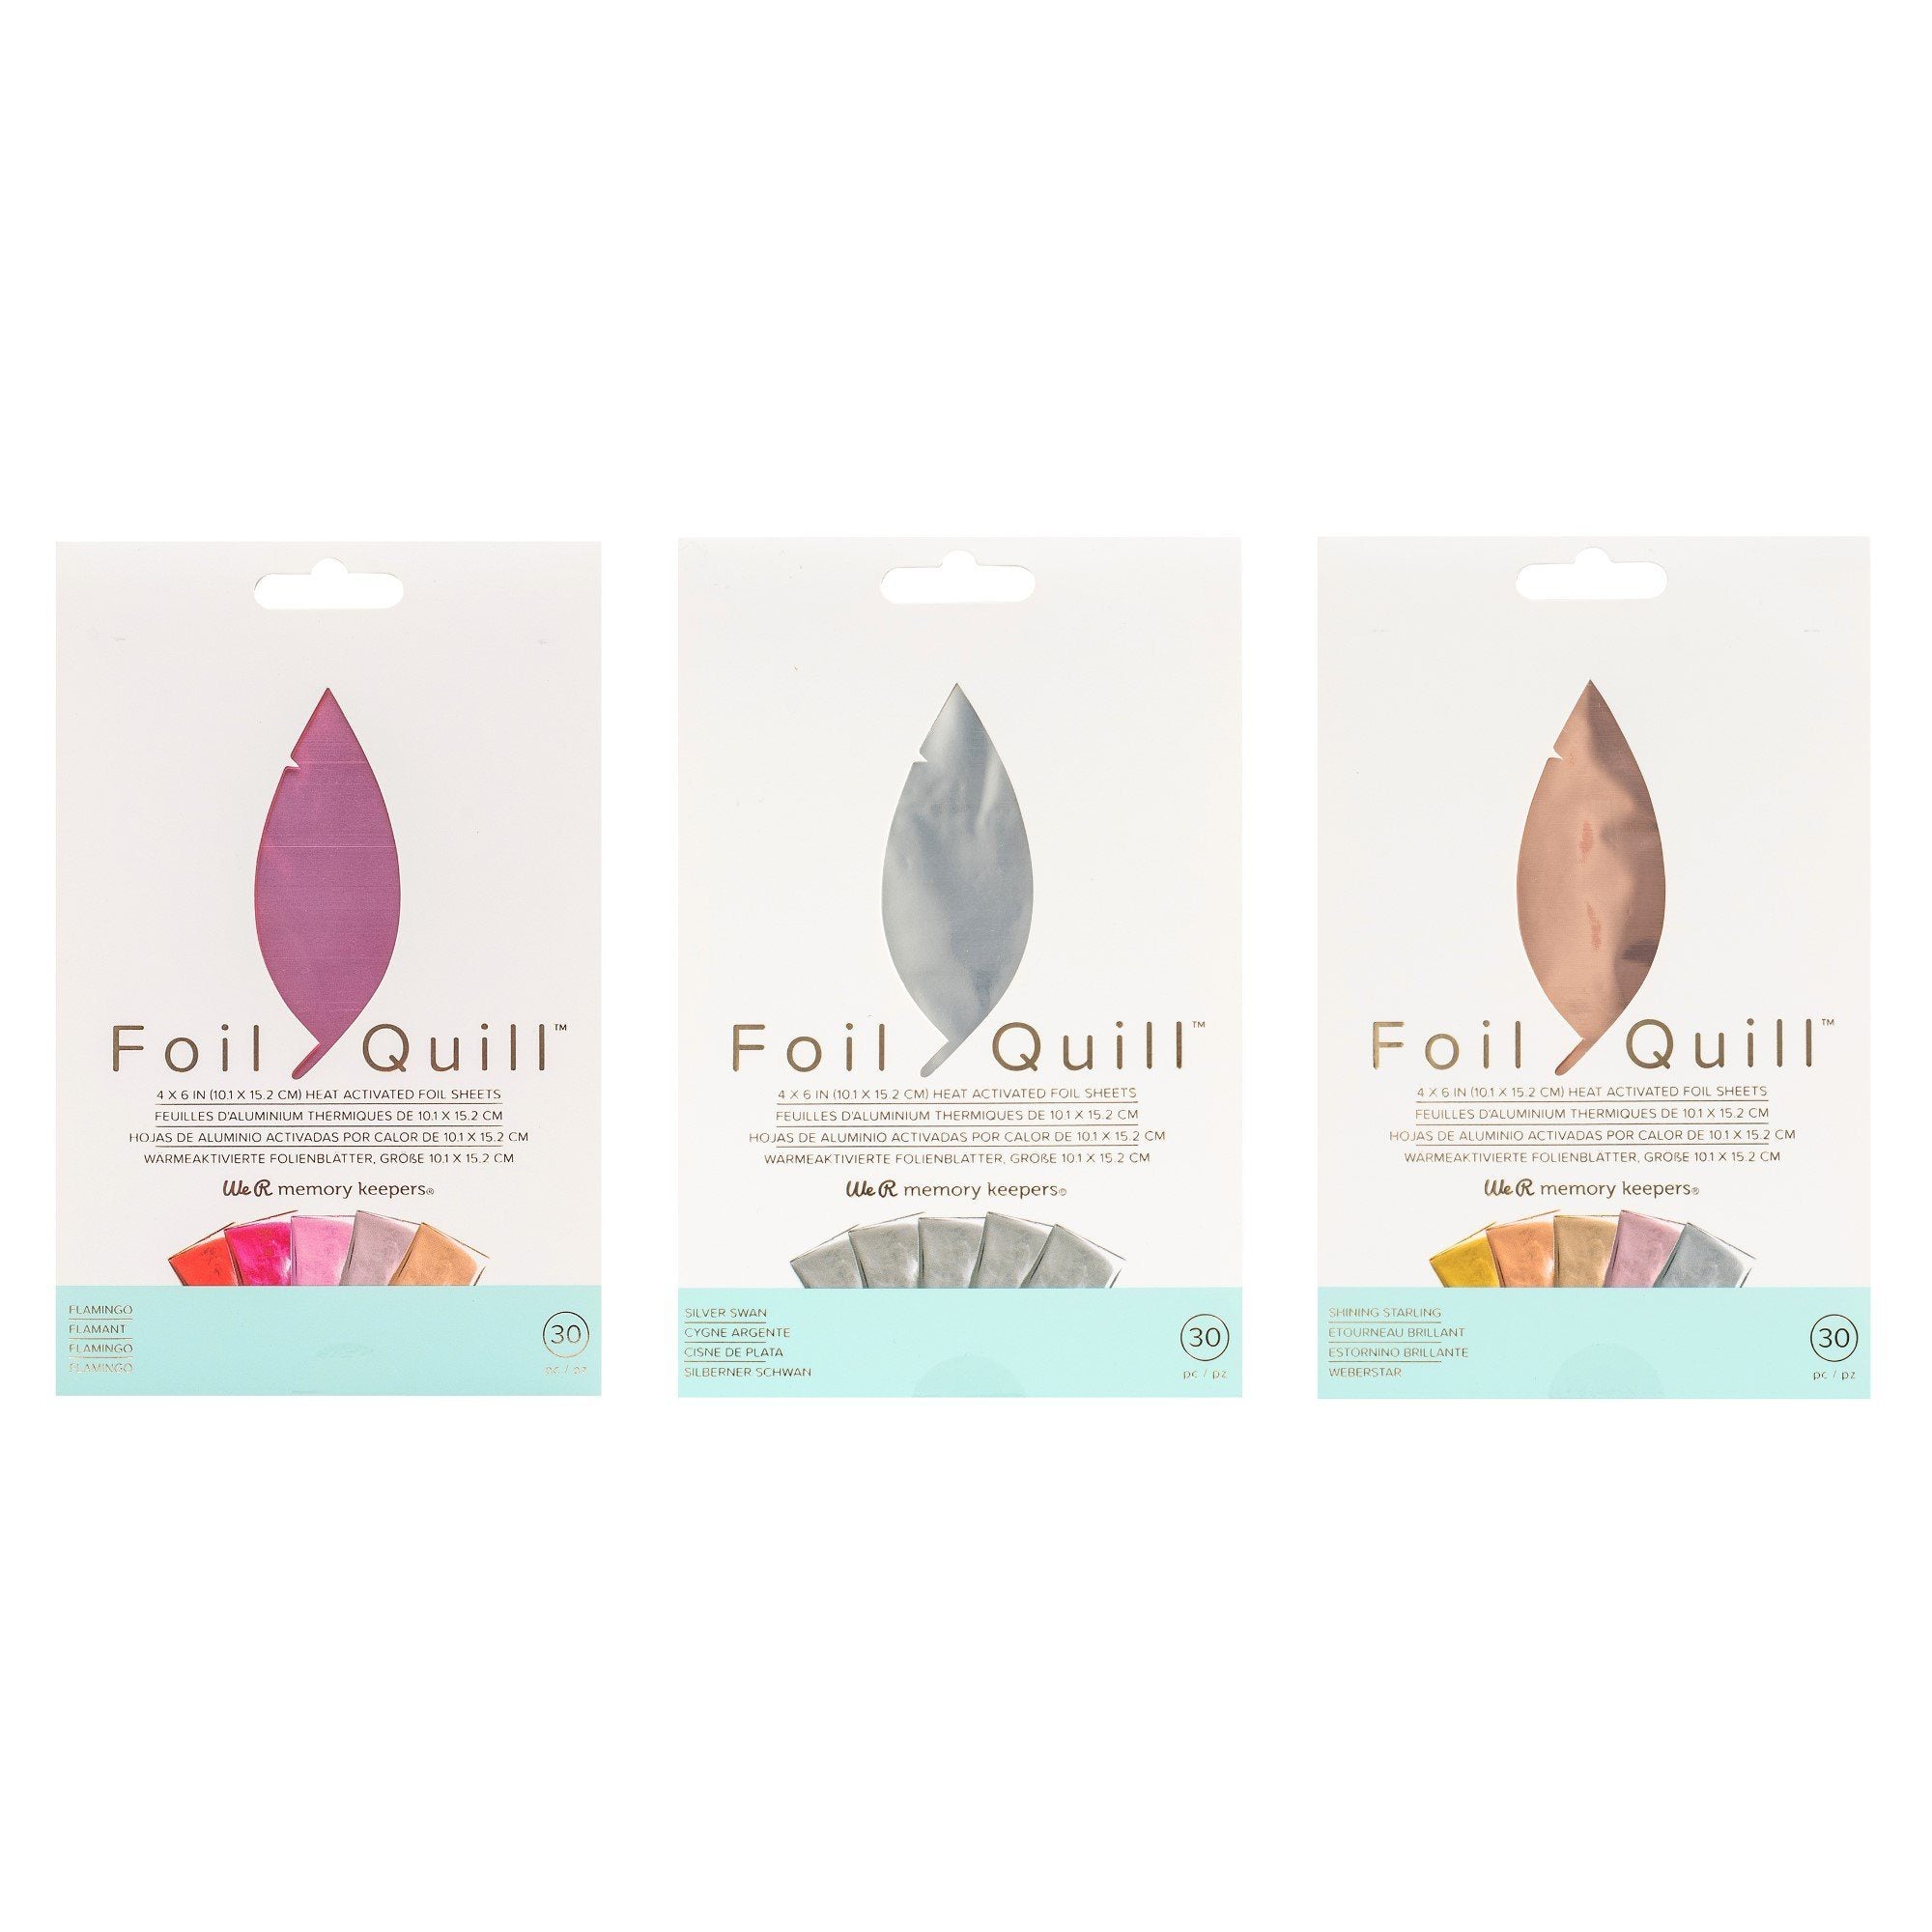 Foil Quill magnetische Matte - We R Memory Keepers